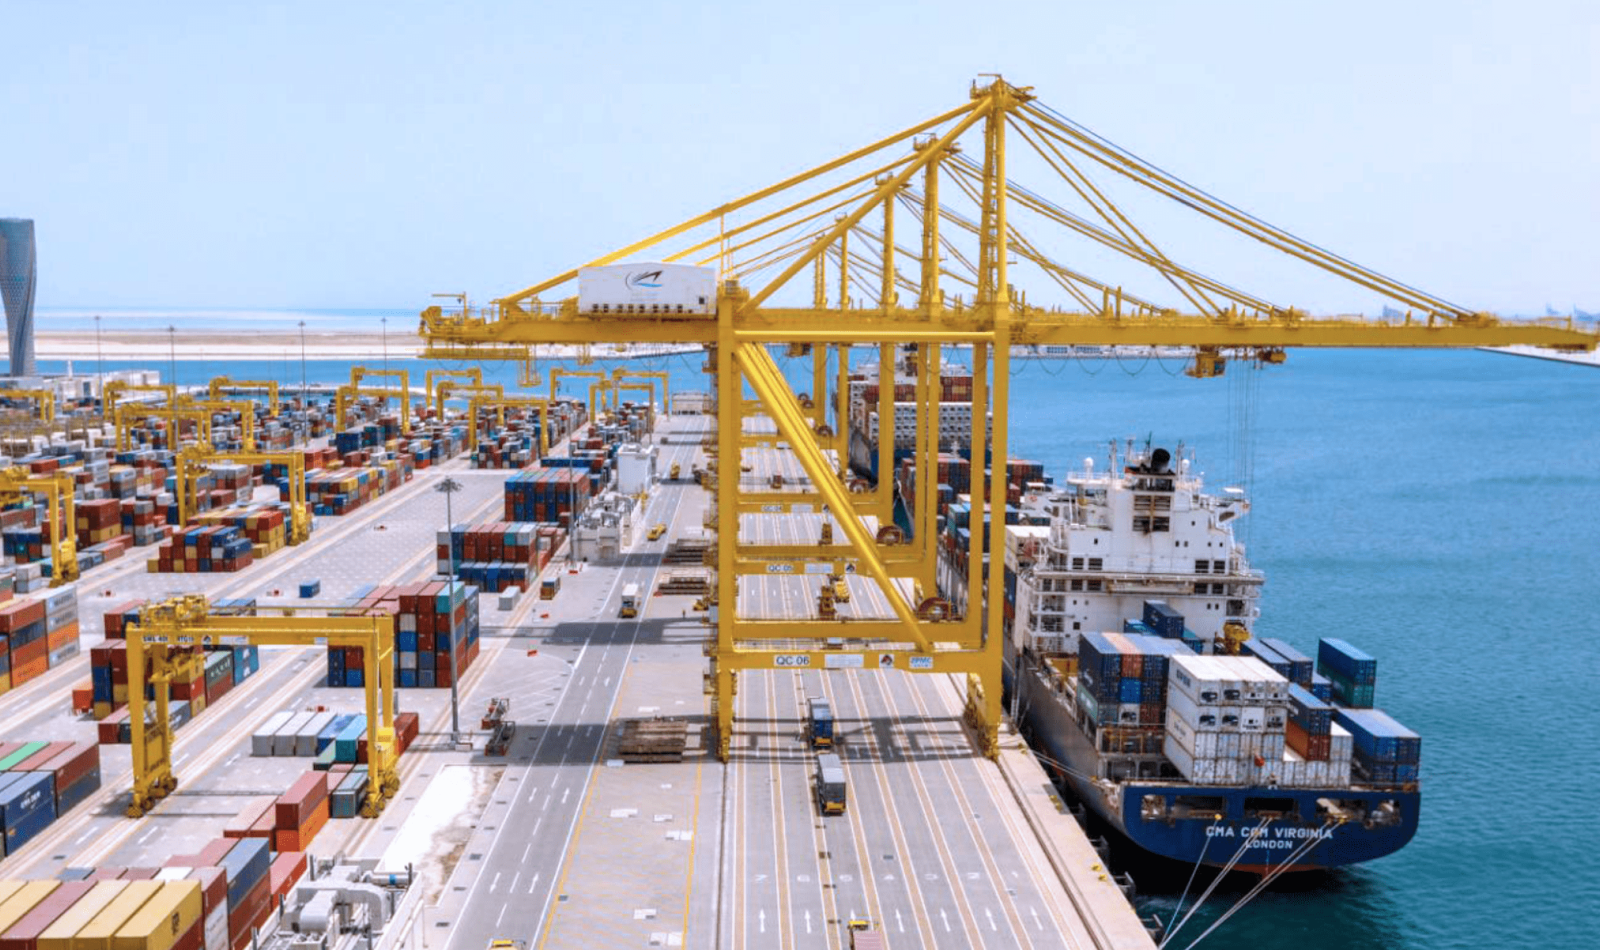 Hamad Port cargo loading, large yellow container cranes placing containers on cargo ships